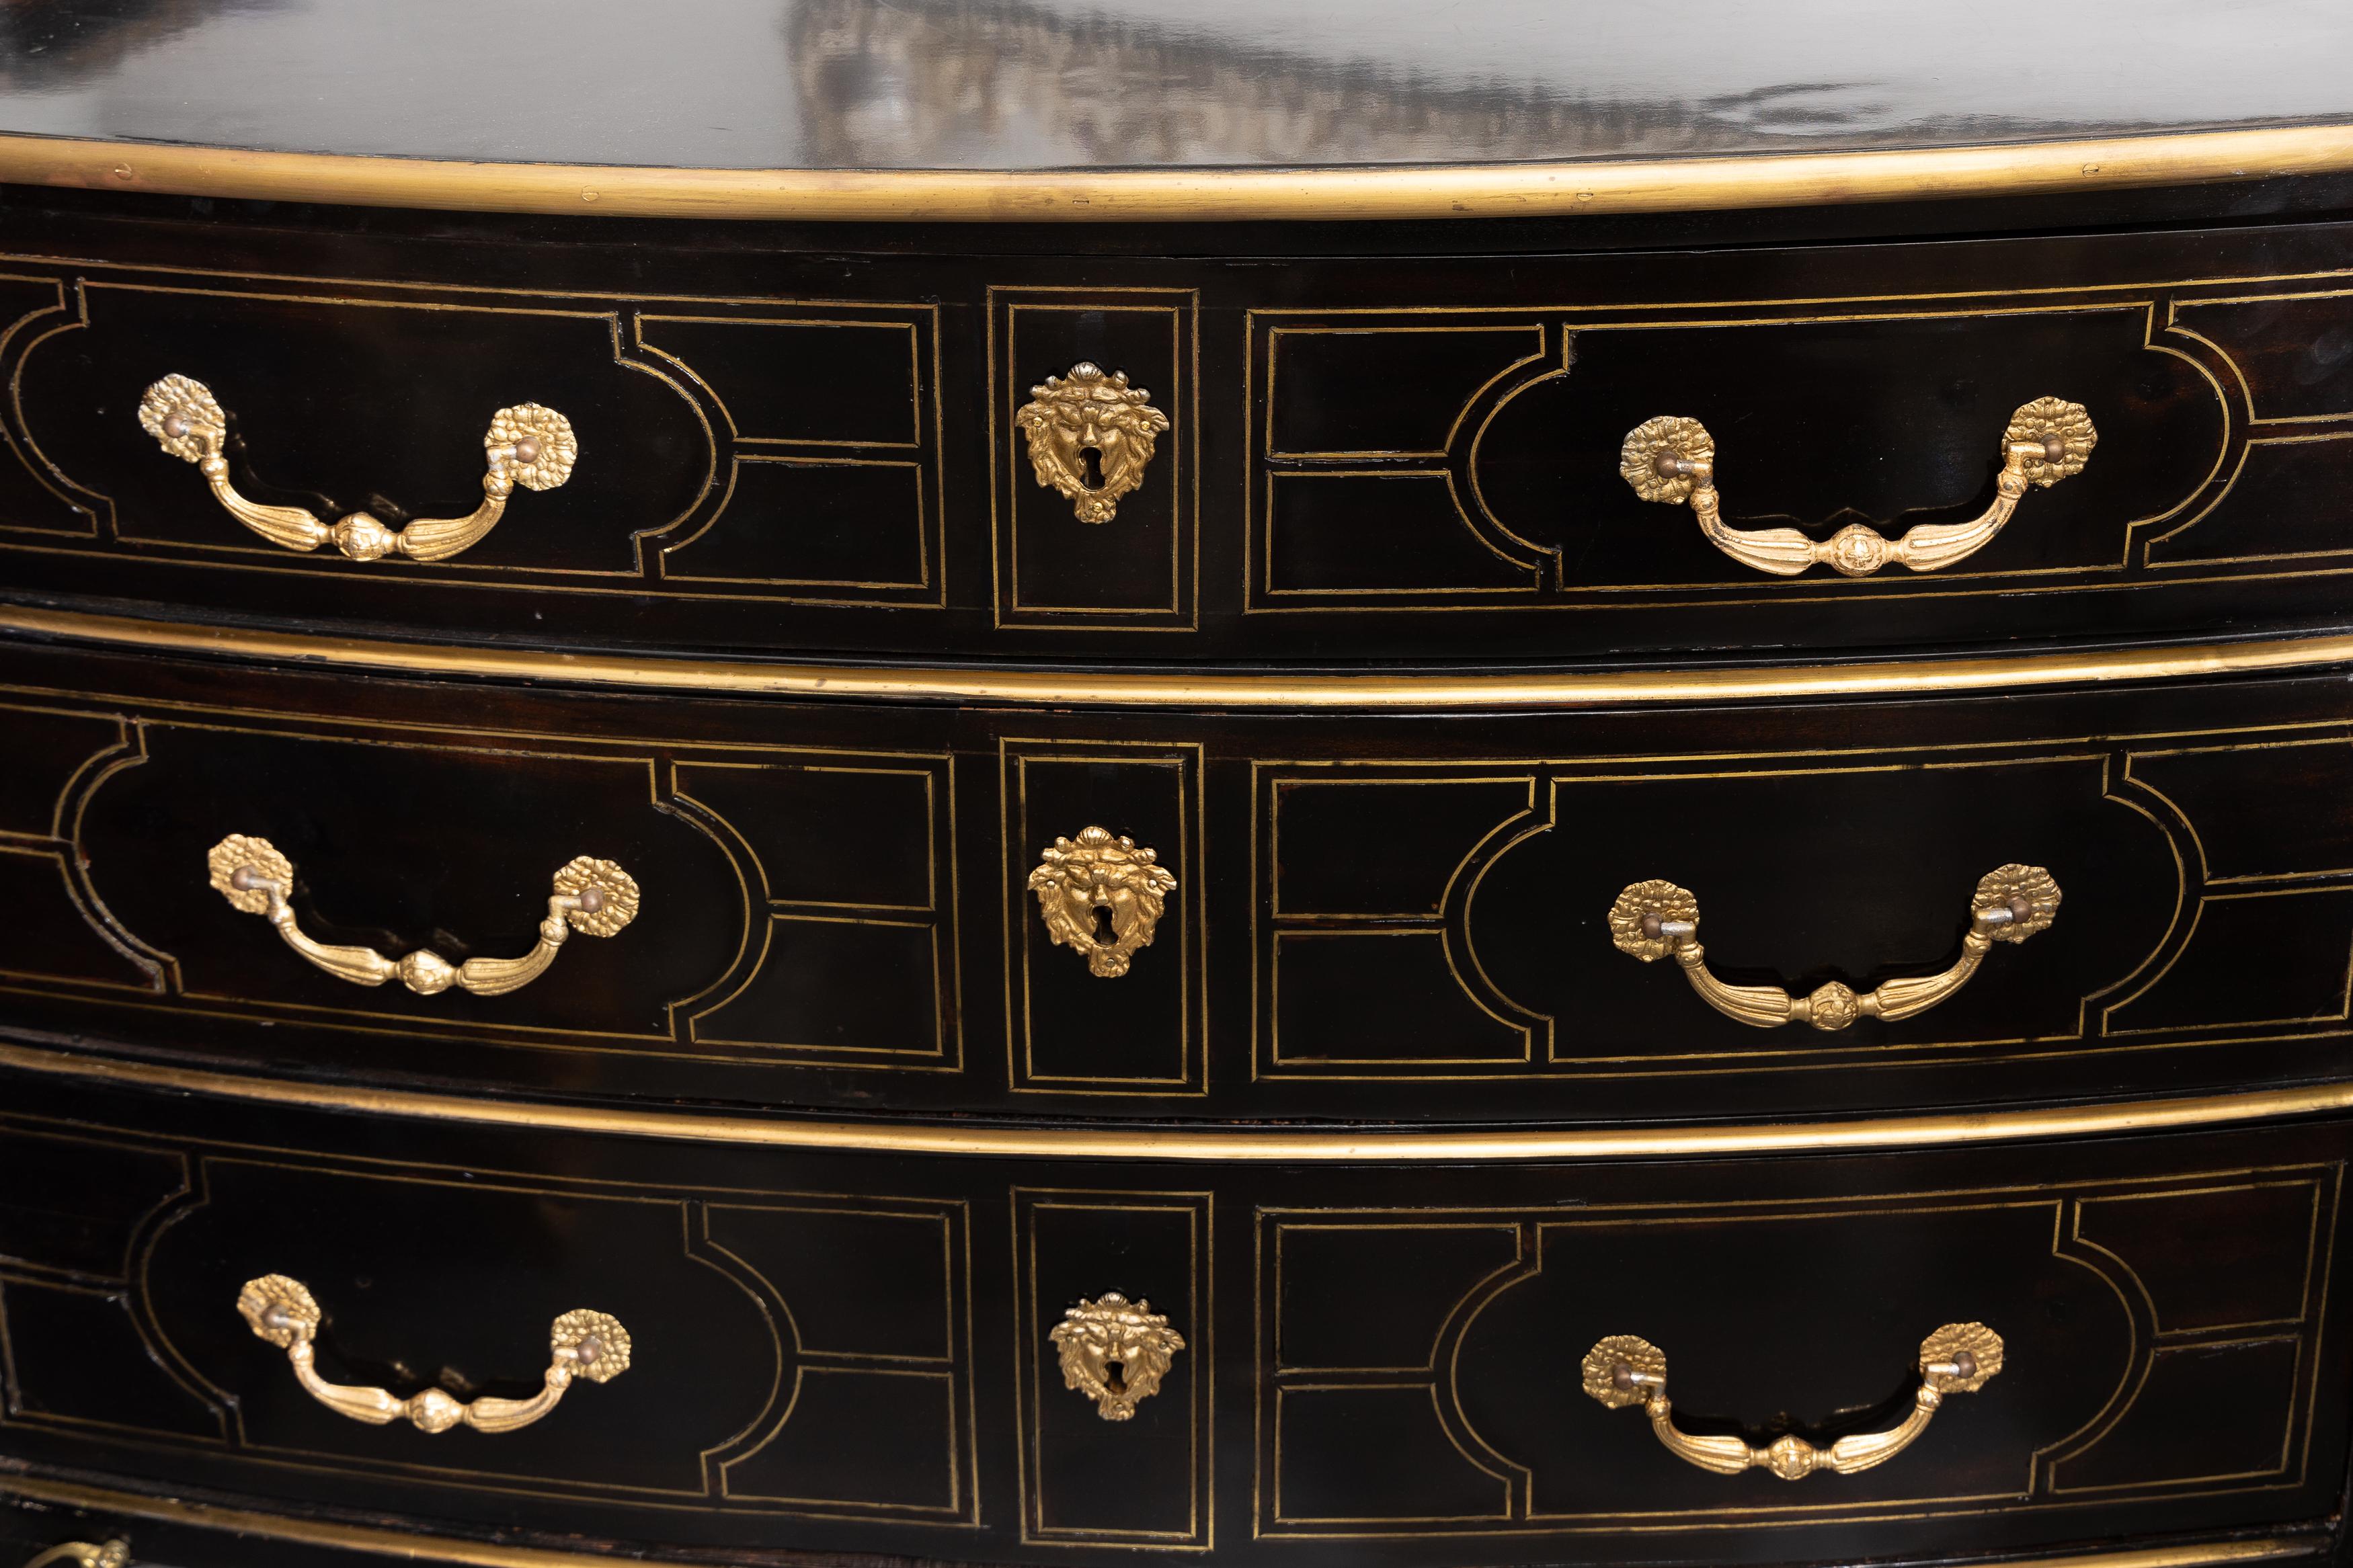 This is a stylish Regence style ebonized commode with brass inlay and brass ornamentation on the frieze and feet, 19th century. The commode contains three long graduated drawers, 19th century.